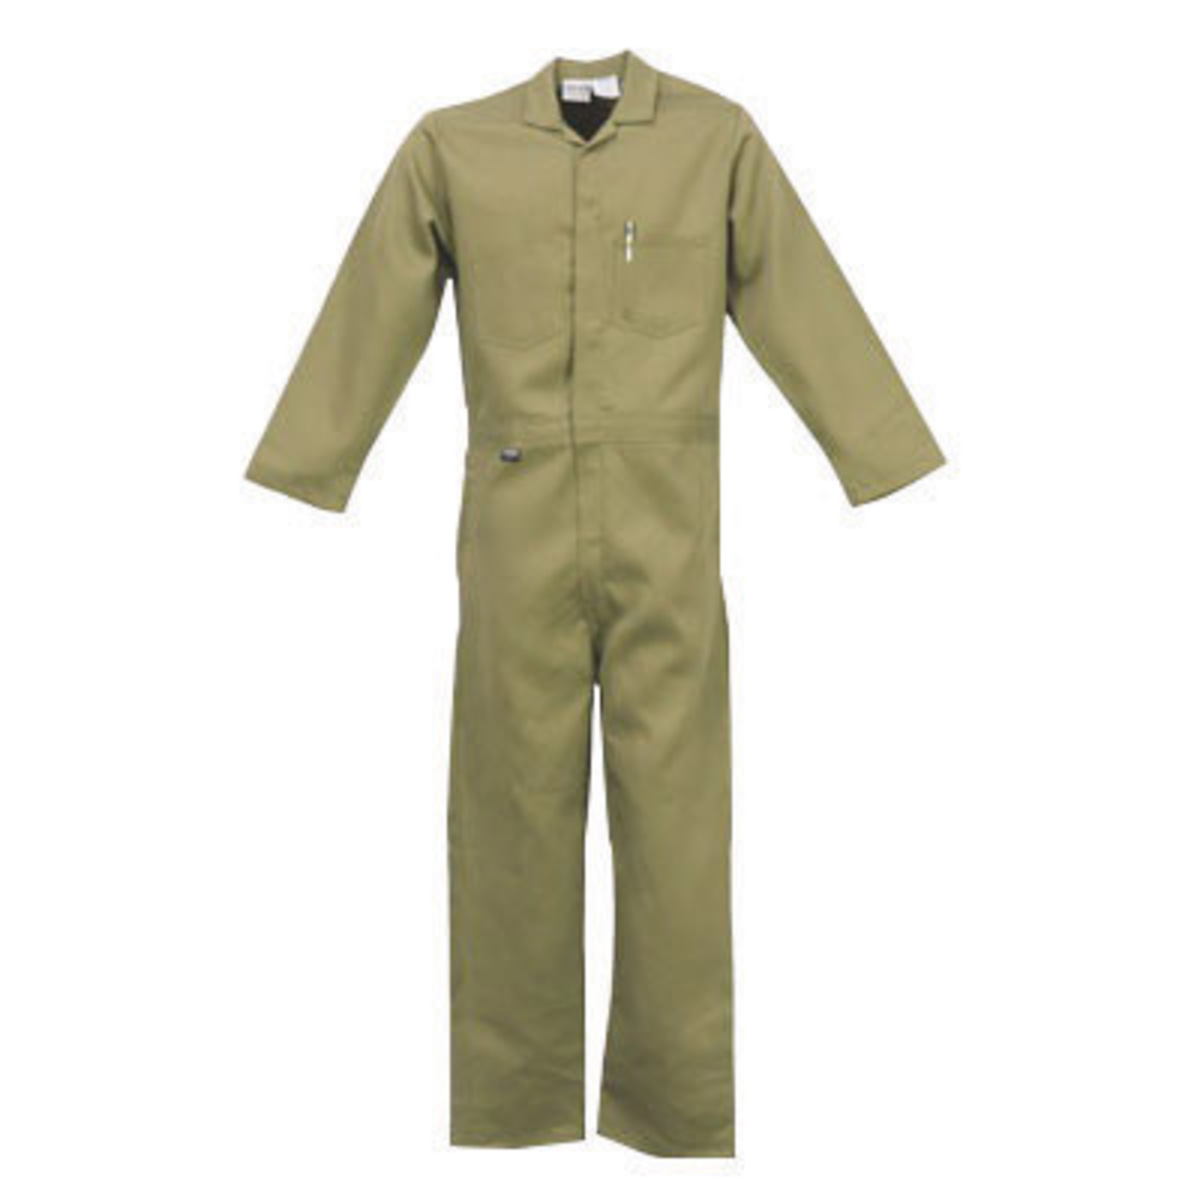 Stanco Safety Products™ Size 2X Tan Indura® UltraSoft® Arc Rated Flame Resistant Coveralls With Front Zipper Closure